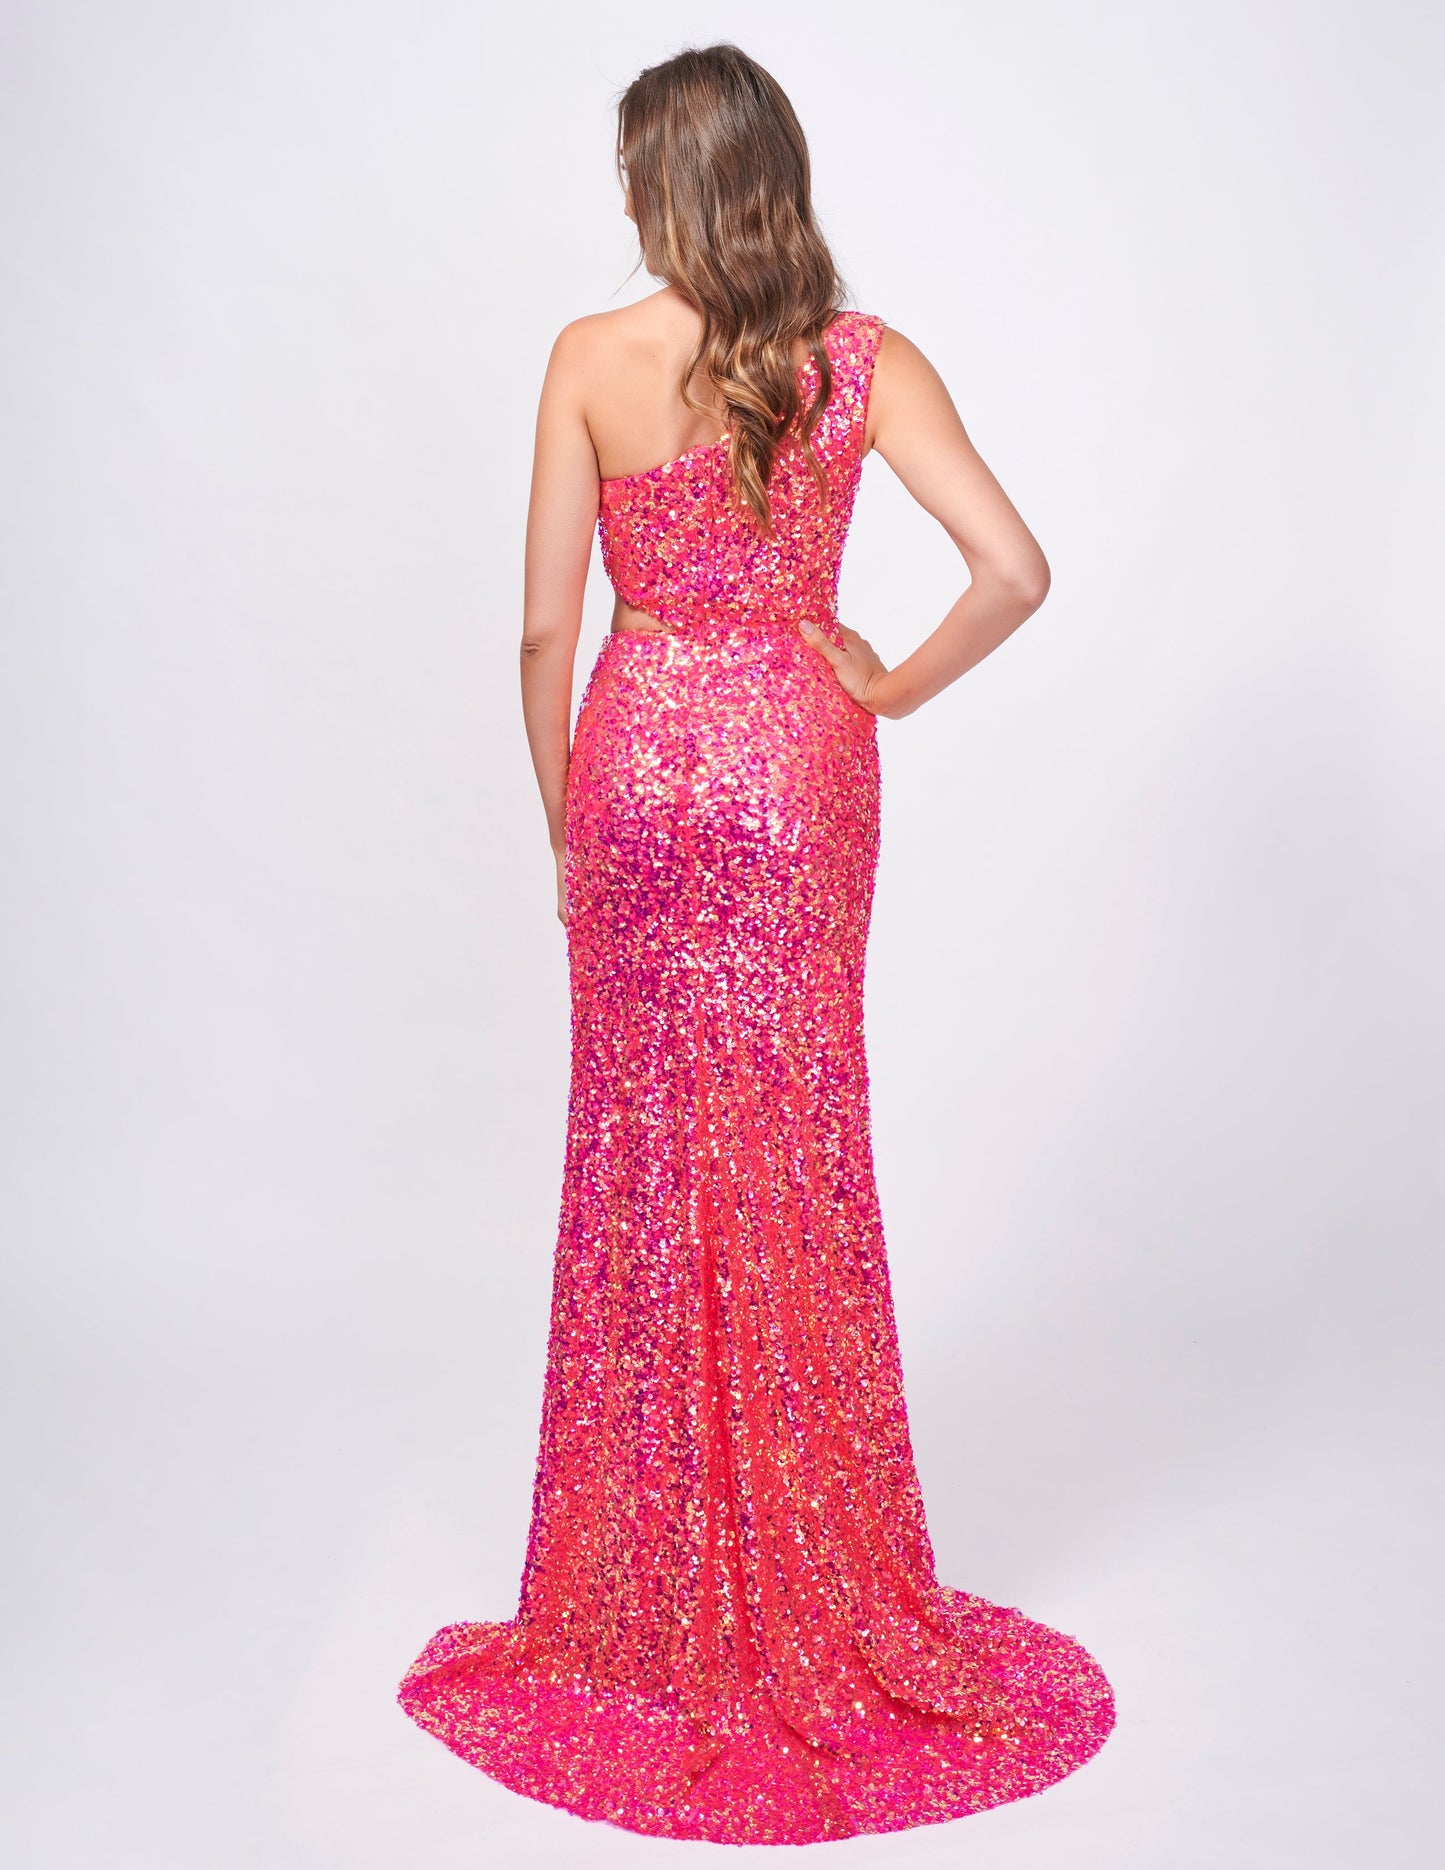 <p data-mce-fragment="1">Be the center of attention in this stunning Nina Canacci 4413 sequin one shoulder prom dress. Featuring a cut out slit design, this formal gown offers a fitted silhouette for a flattering look. Perfect for any evening event, be prepared to make a statement with this elegant and modern dress.</p> <p data-mce-fragment="1">Sizes: 0-12</p> <p data-mce-fragment="1">Colors: Fuchsia, Baby Blue</p>